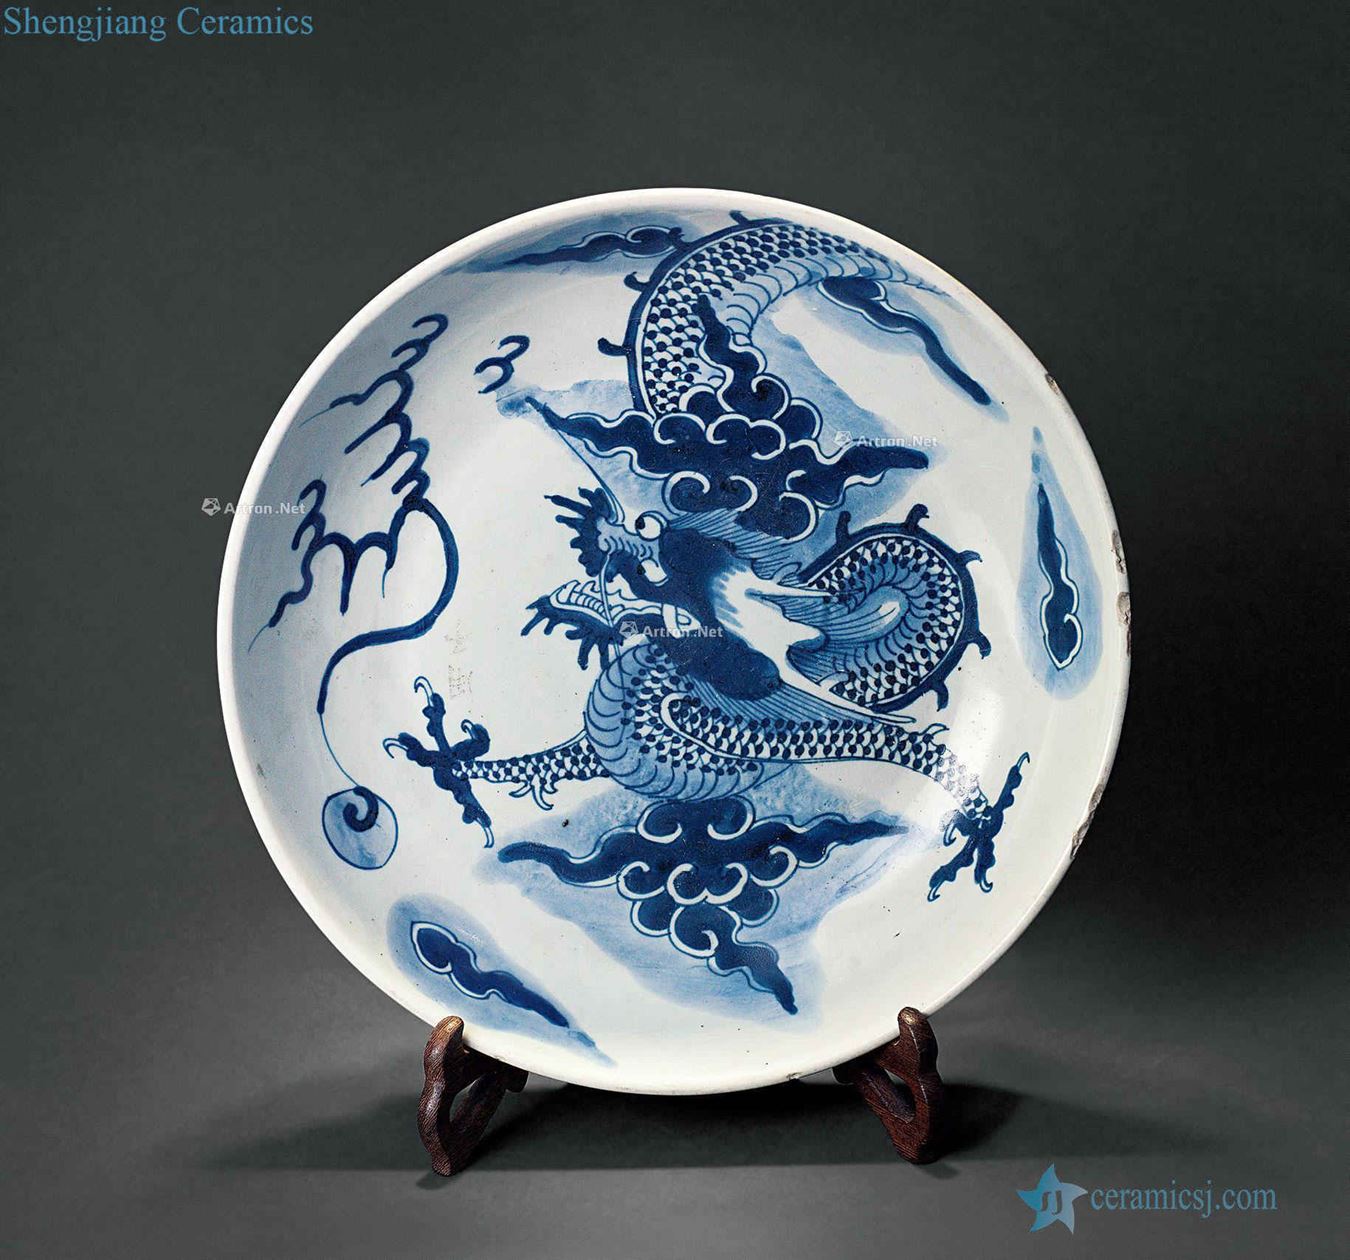 In the qing dynasty Blue and white entadae stem the broader market